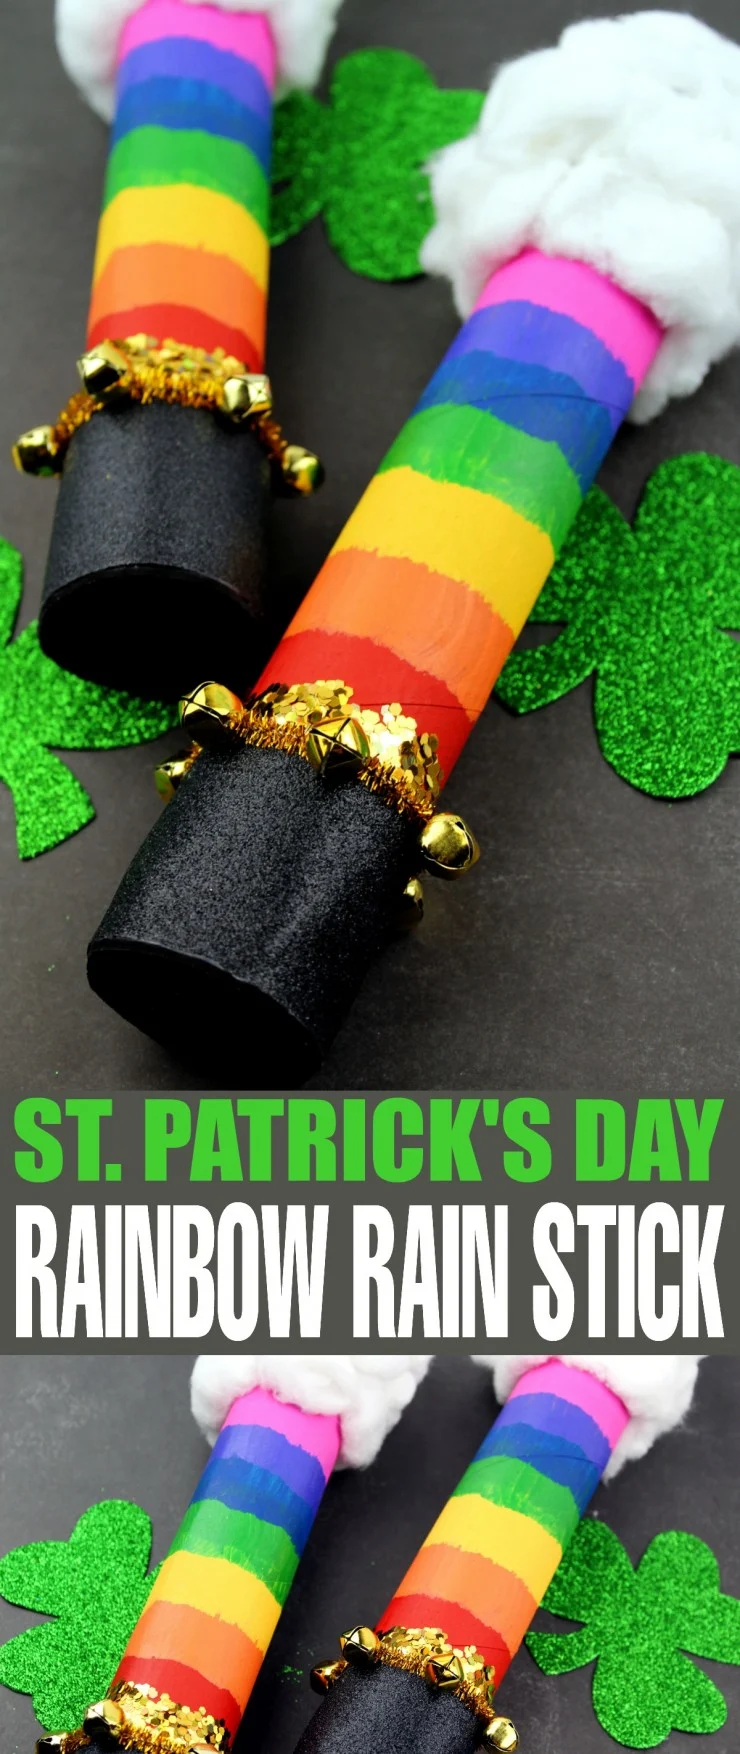  This St. Patrick's Day Rainbow Rain Stick is fun craft for kids that result in a music maker they can celebrate the day with. This rainbow rain stick features clouds, a rainbow and even a pot of gold at the end. It's a whimsical music maker perfect for celebrating St. patrick's day with kids!